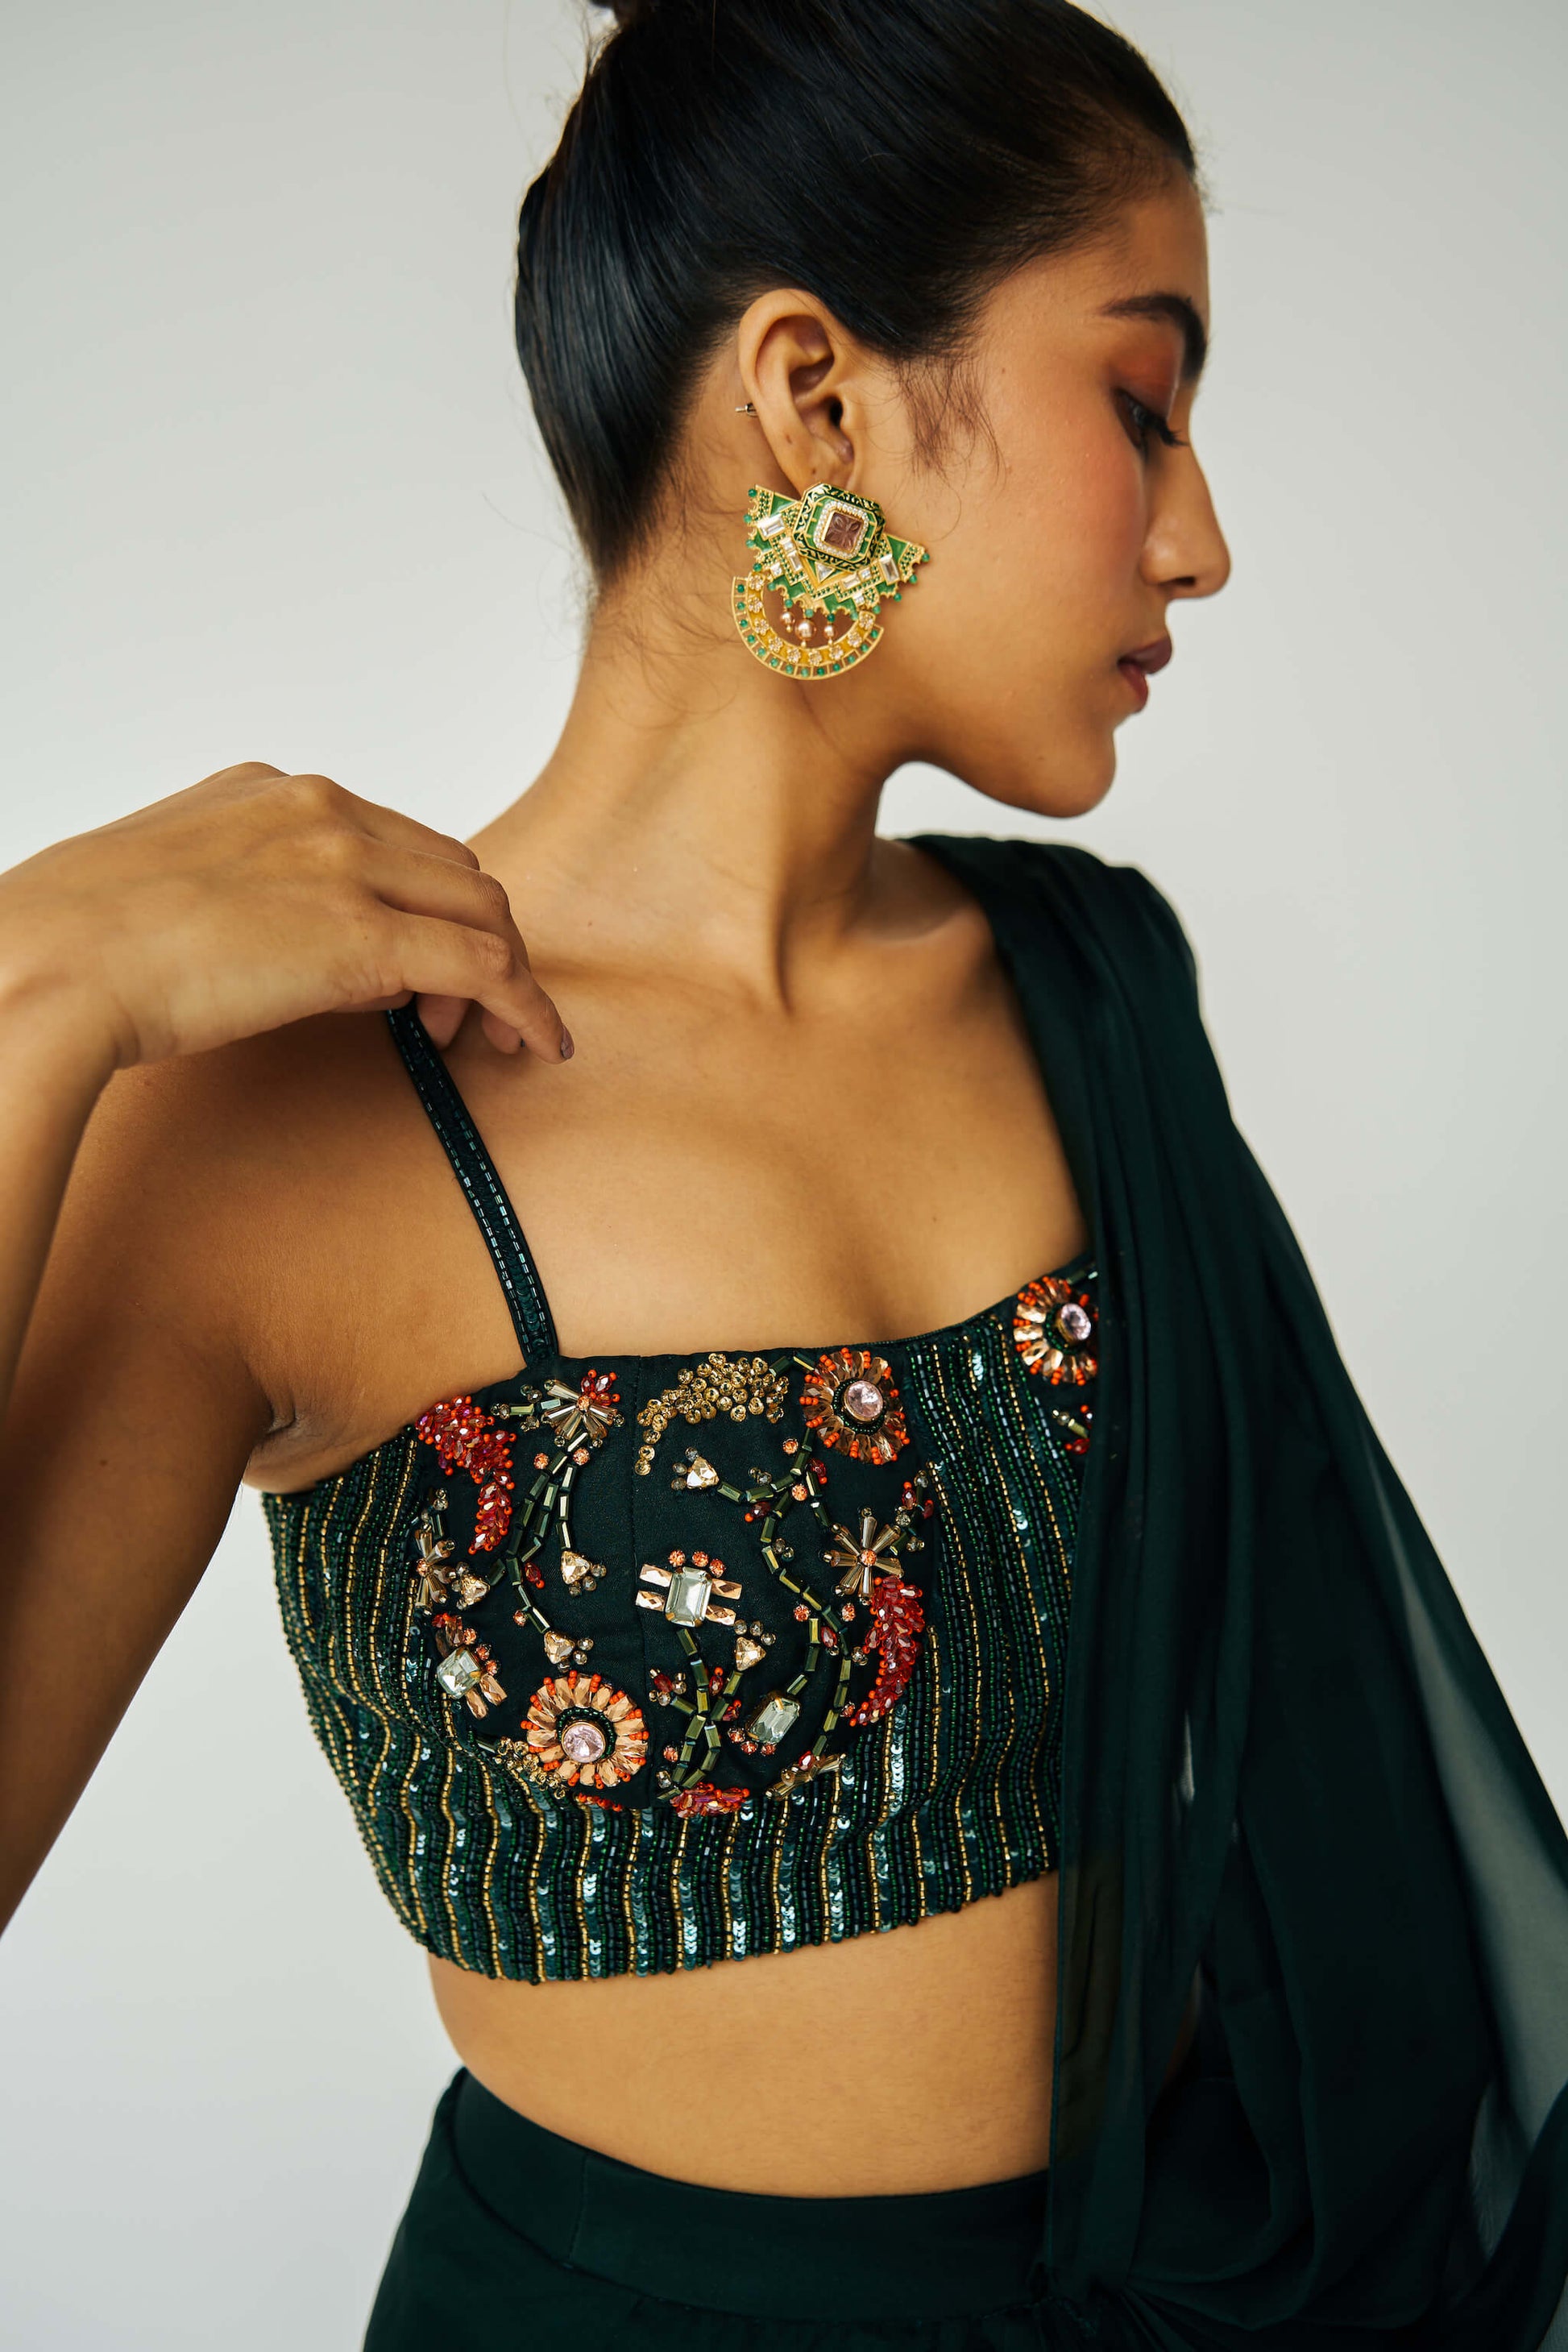 The Adya Drape Saree makes it easy to get the saree look without any pleating and features a shiny organaza skirt with an attached drape + a hand embroidered, bustier top. 